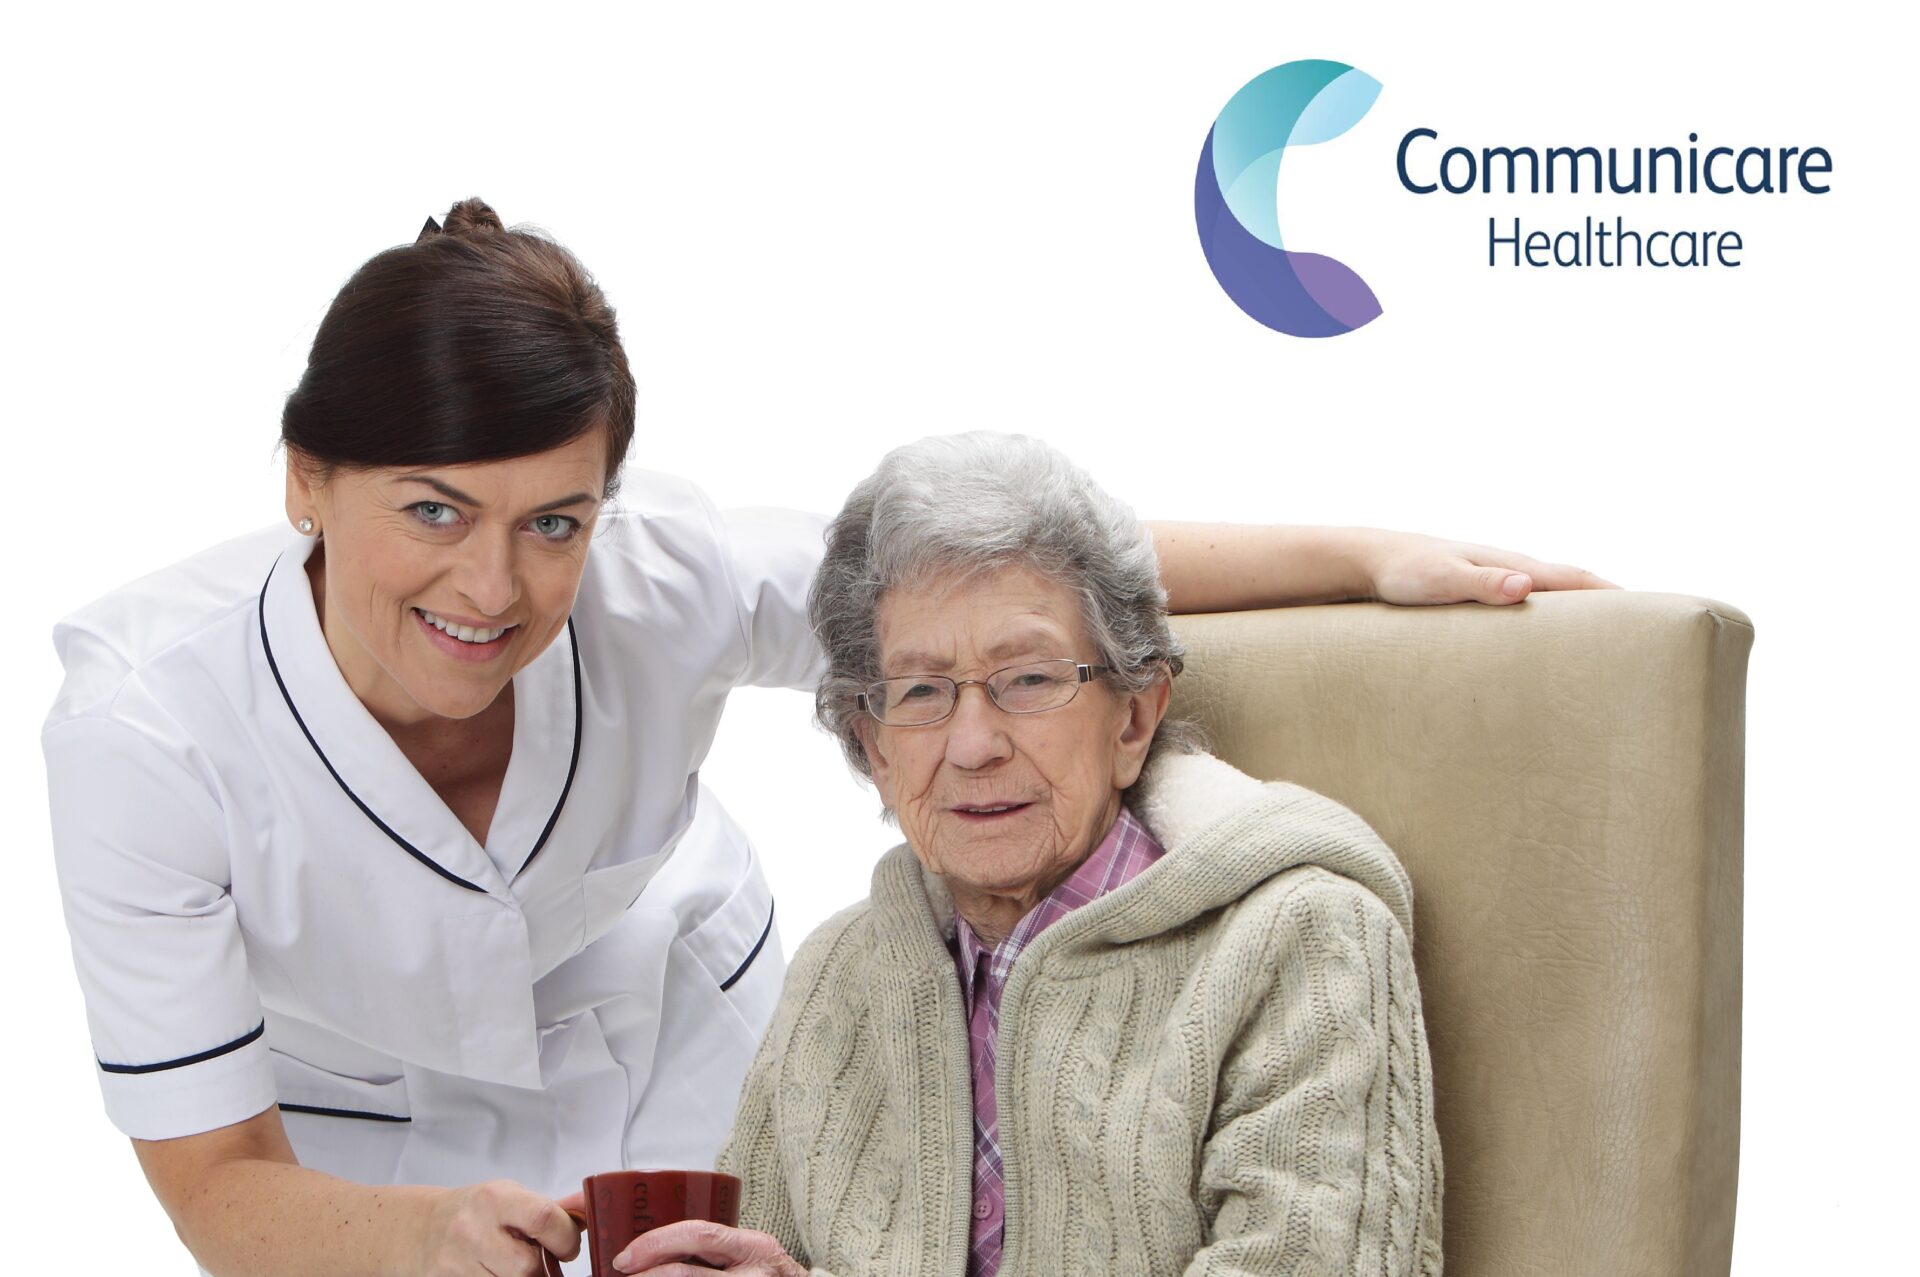 Looking for Homecare? Here’s what you should look out for!